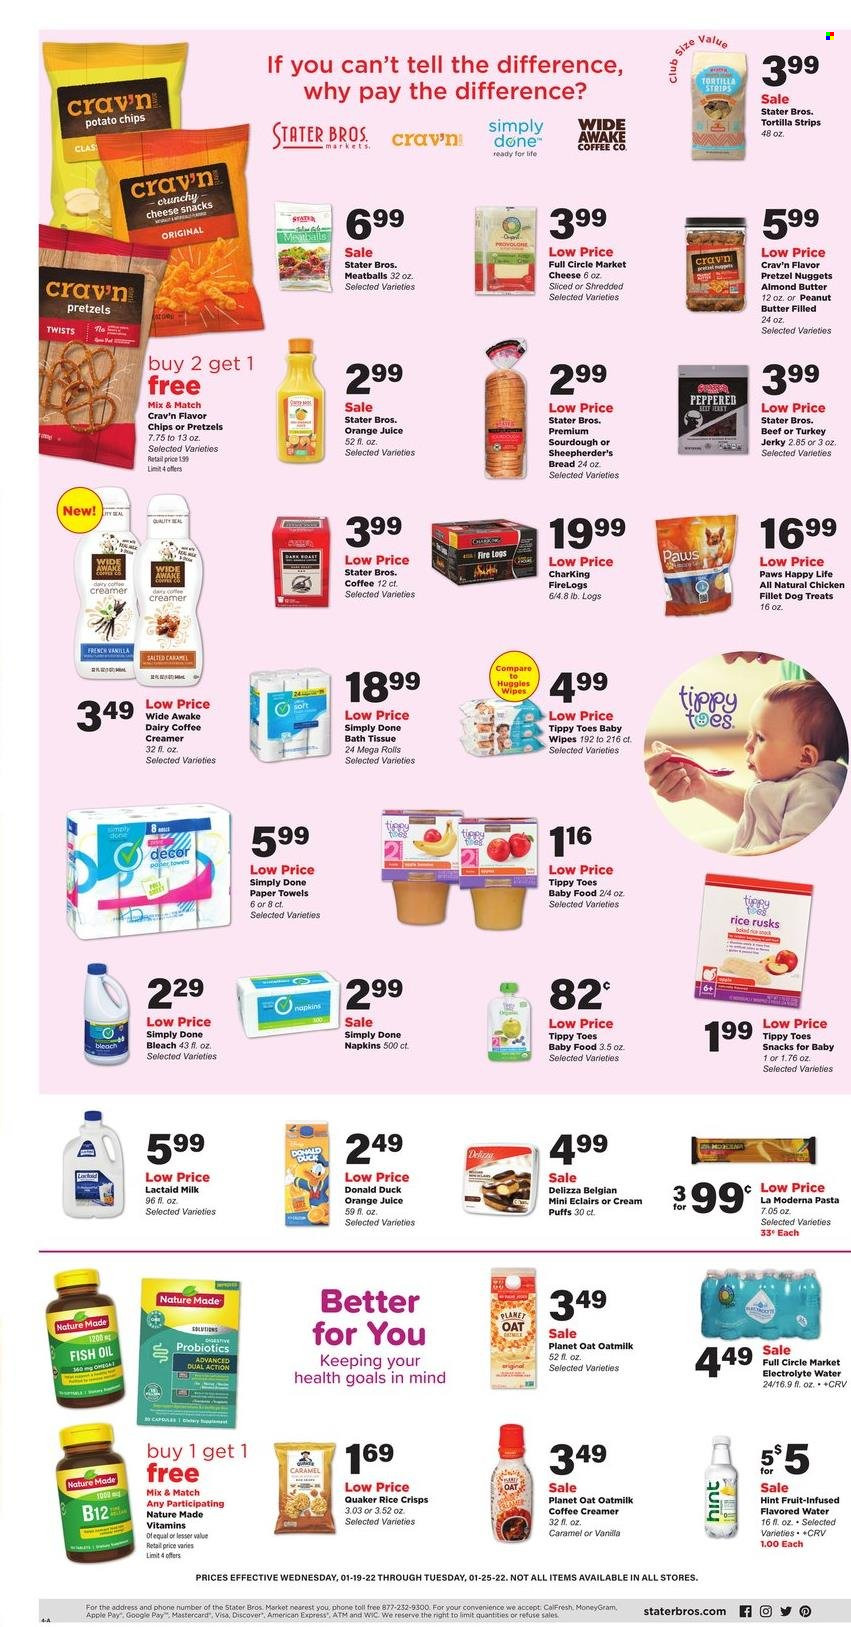 thumbnail - Stater Bros. Flyer - 01/19/2022 - 01/25/2022 - Sales products - bread, tortillas, pretzels, puffs, rusks, meatballs, nuggets, pasta, Quaker, jerky, Lactaid, cheese, Provolone, milk, oat milk, almond butter, creamer, snack, potato chips, chips, rice crisps, oil, peanut butter, orange juice, juice, flavored water, wipes, baby wipes, napkins, bath tissue, kitchen towels, paper towels, bleach, Paws, fish oil, Nature Made, probiotics. Page 4.